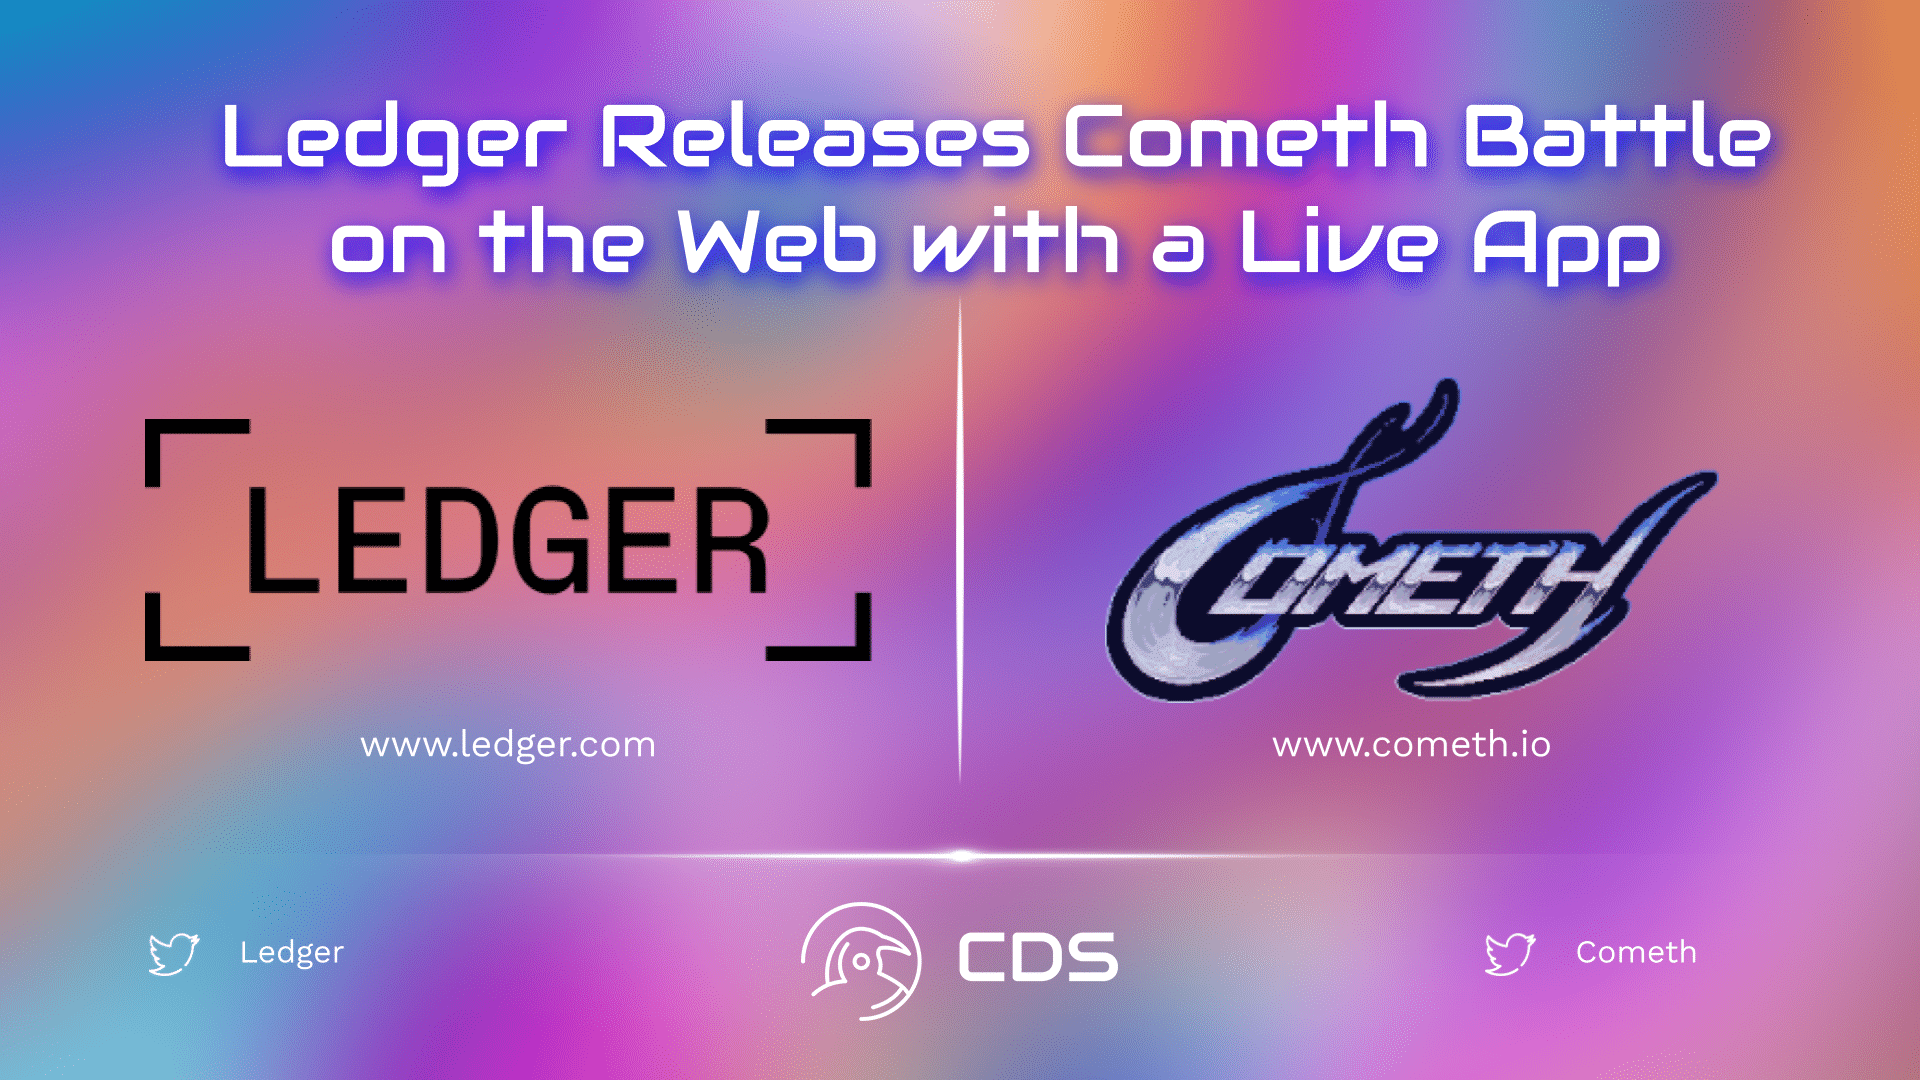 Ledger Releases Cometh Battle on the Web with a Live App